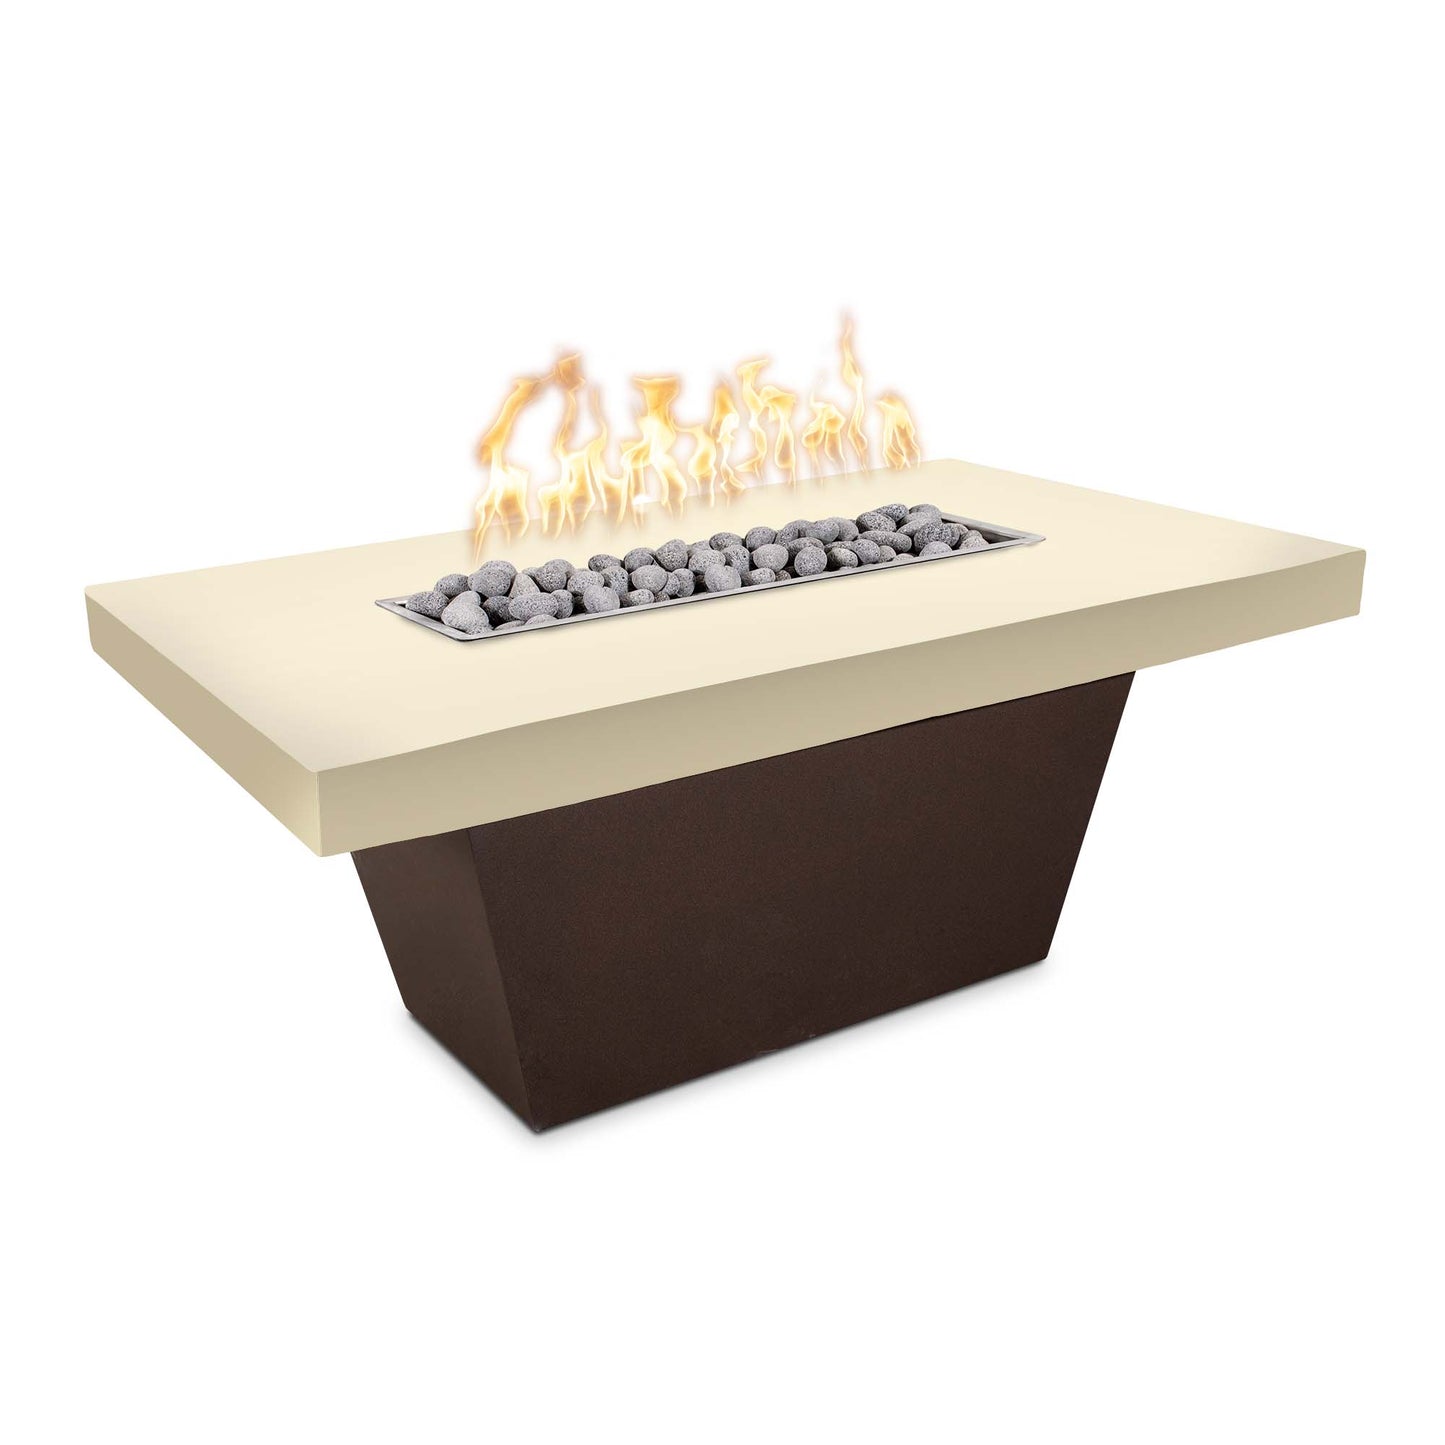 The Outdoor Plus Tacoma 48" White Limestone Concrete Top & White Powder Coated Base Liquid Propane Fire Table with Match Lit Ignition